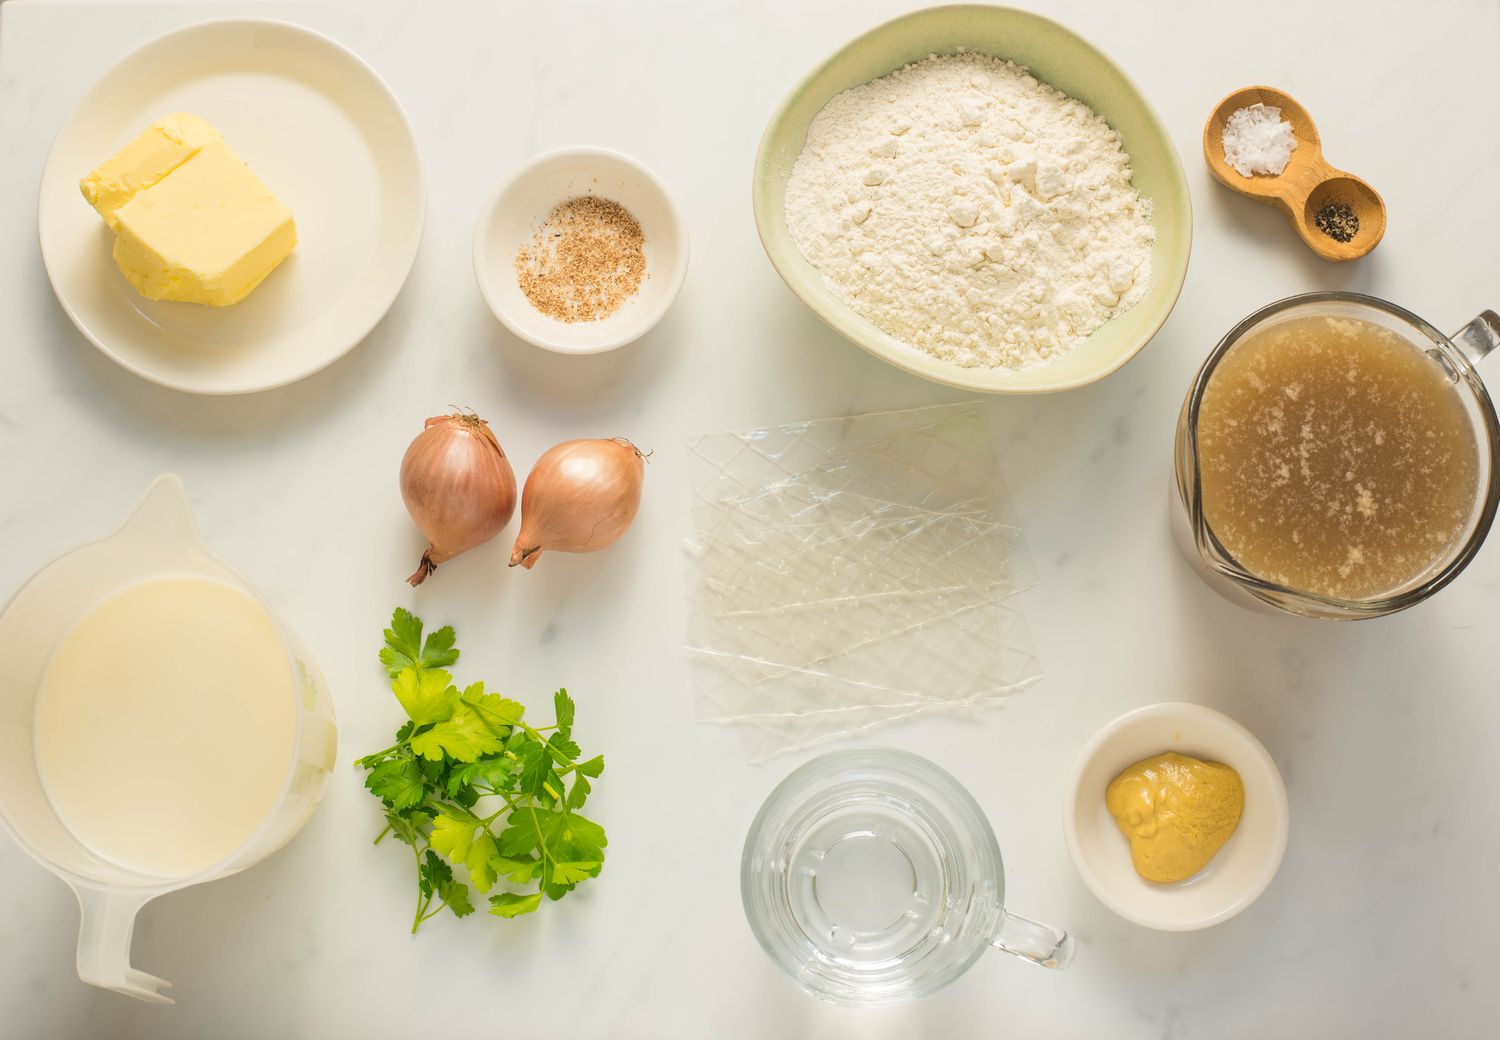 Ingredients for roux-based mixture